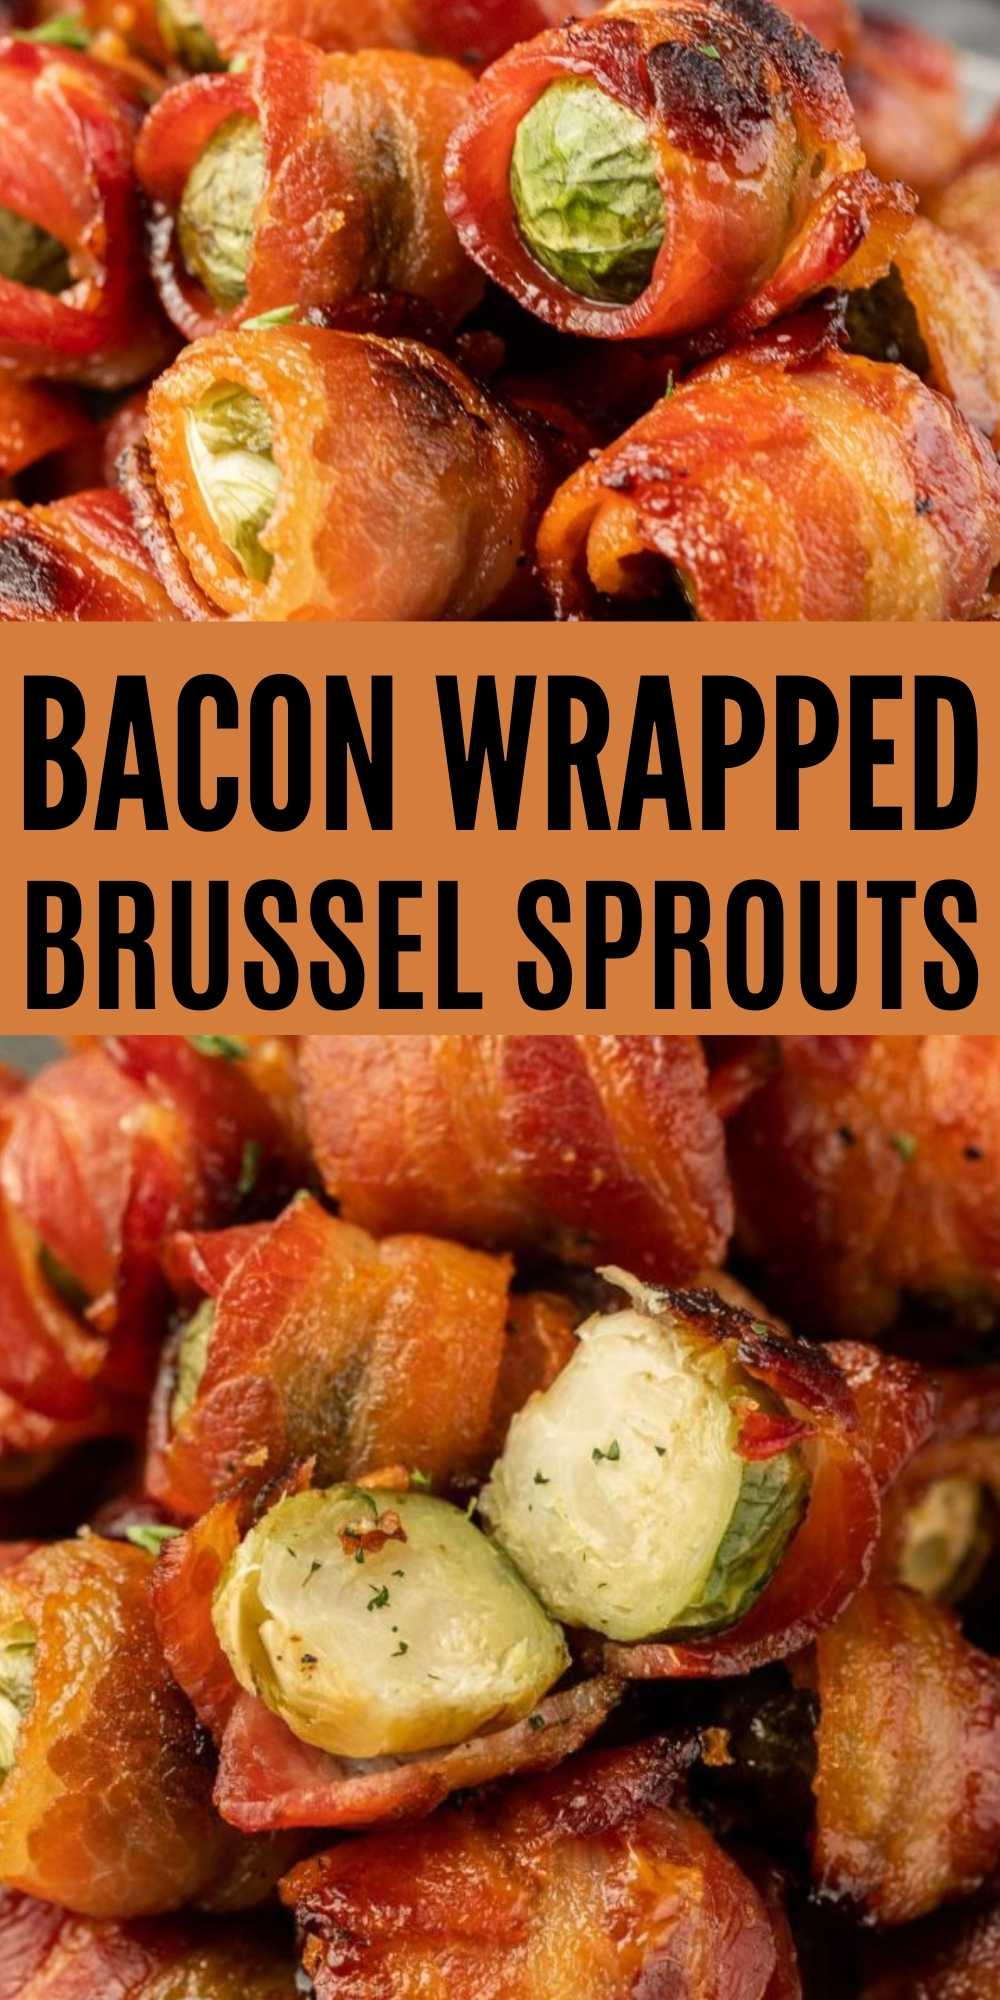 Bacon Wrapped Brussel Sprouts is the perfect holiday appetizer. The Brussel Sprouts are made with simple ingredients for a flavorful side. The perfect baked appetizer or side dish. #eatingonadime #baconwrapped #brusselsprouts